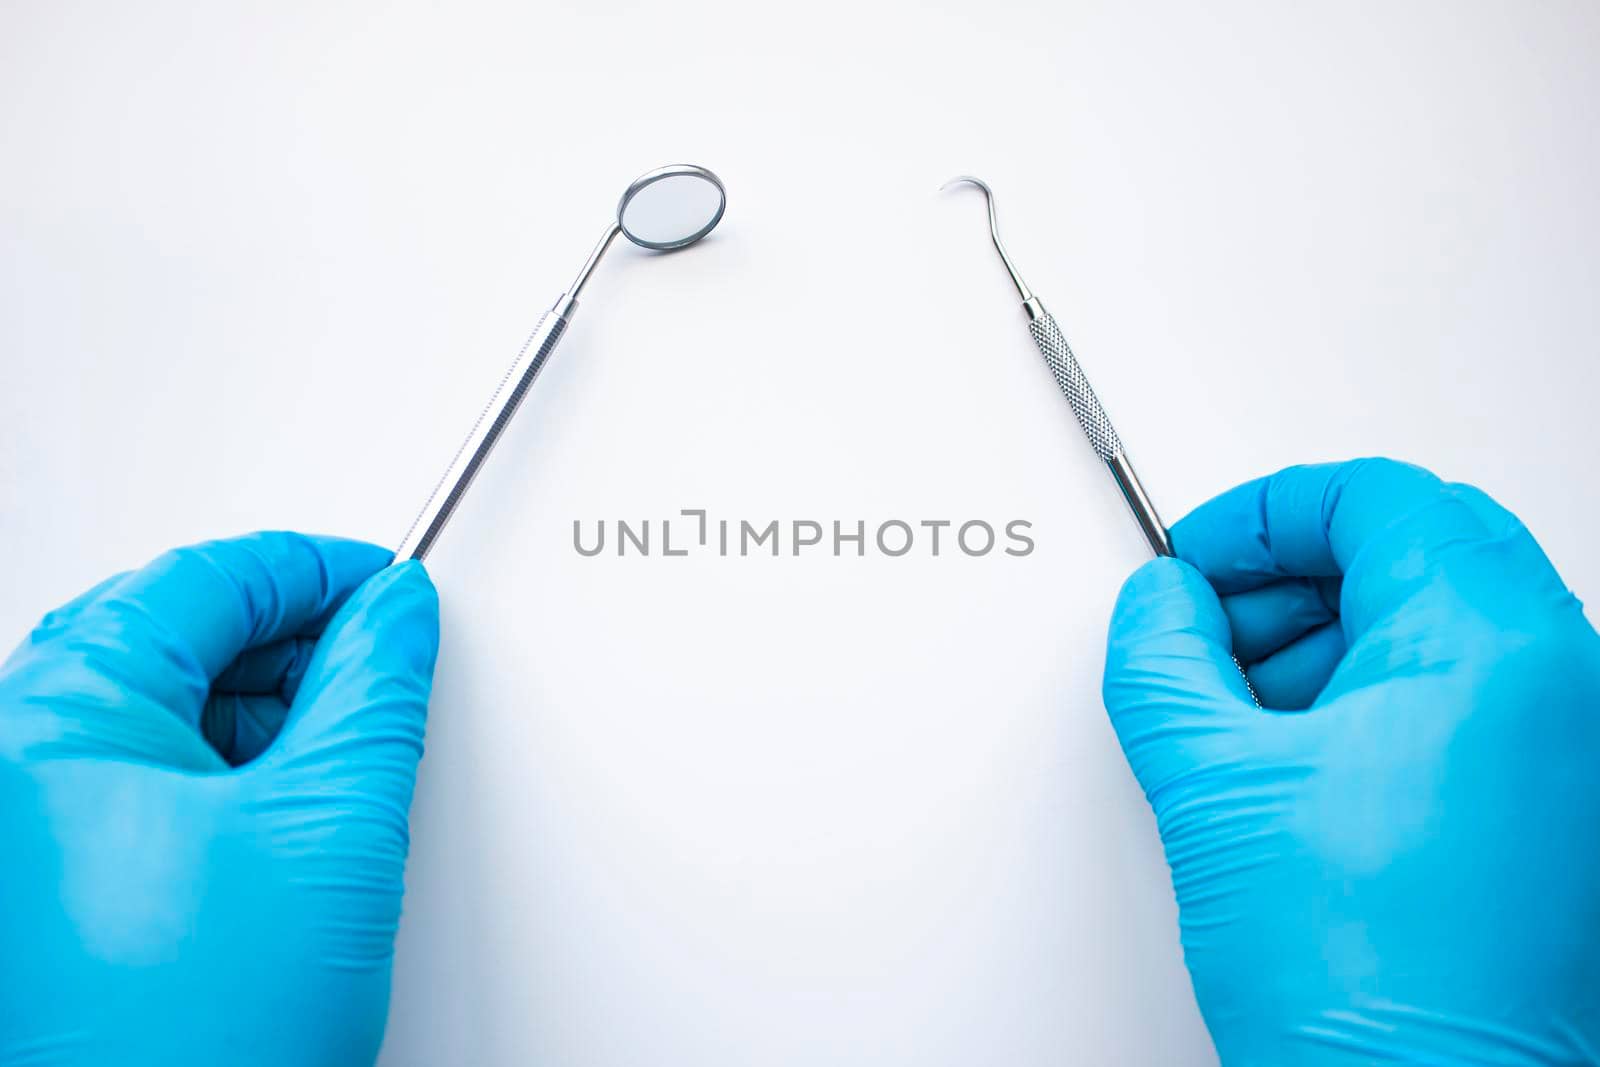 Dentist mirror and probe in hands isolated on white. Professional Dental Hygiene cleaning tools. Calculus and Plaque Remover Set, Dental Scaler And Mouth Mirror Instruments Hygienist tools. by oasisamuel